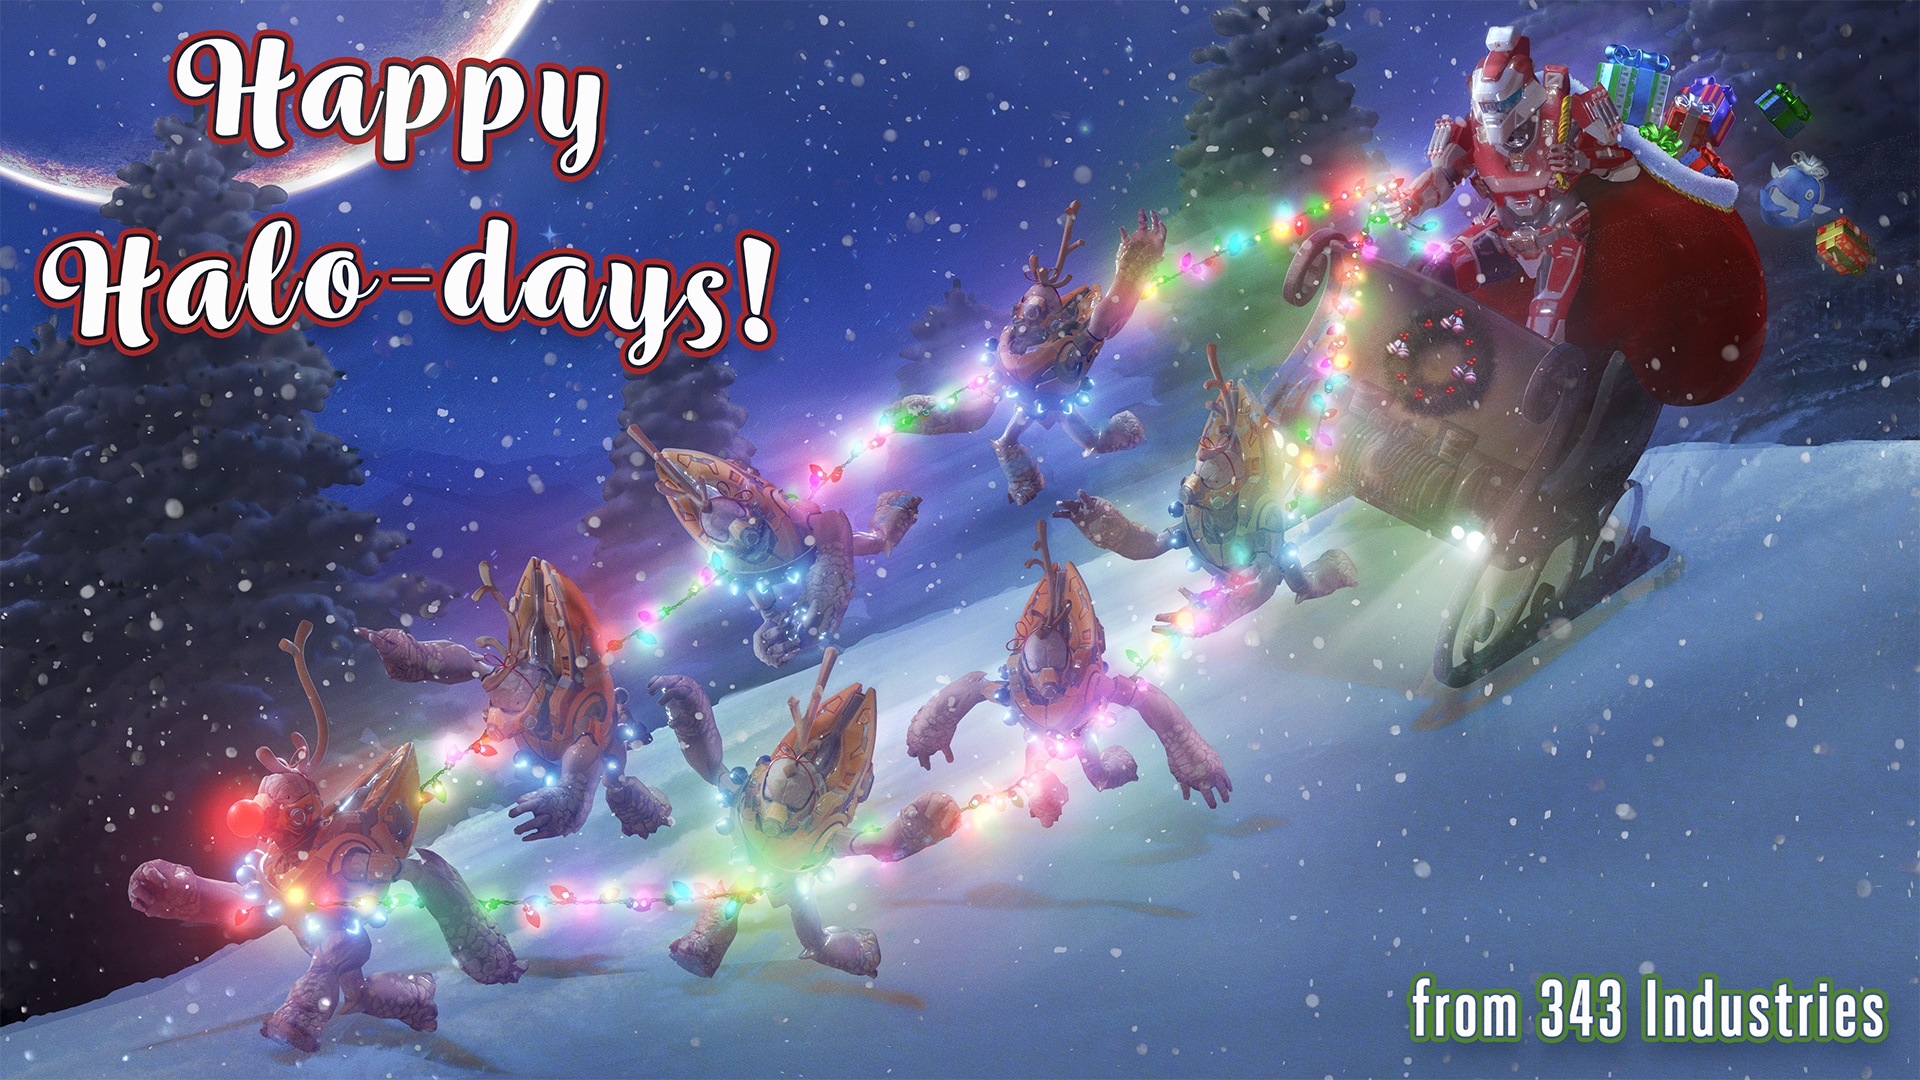 2023 Holiday Card from 343 depicting Spartan Santa riding a sleigh pulled by Unggoy with text that reads "Happy Halo-days! From 343 Industries"